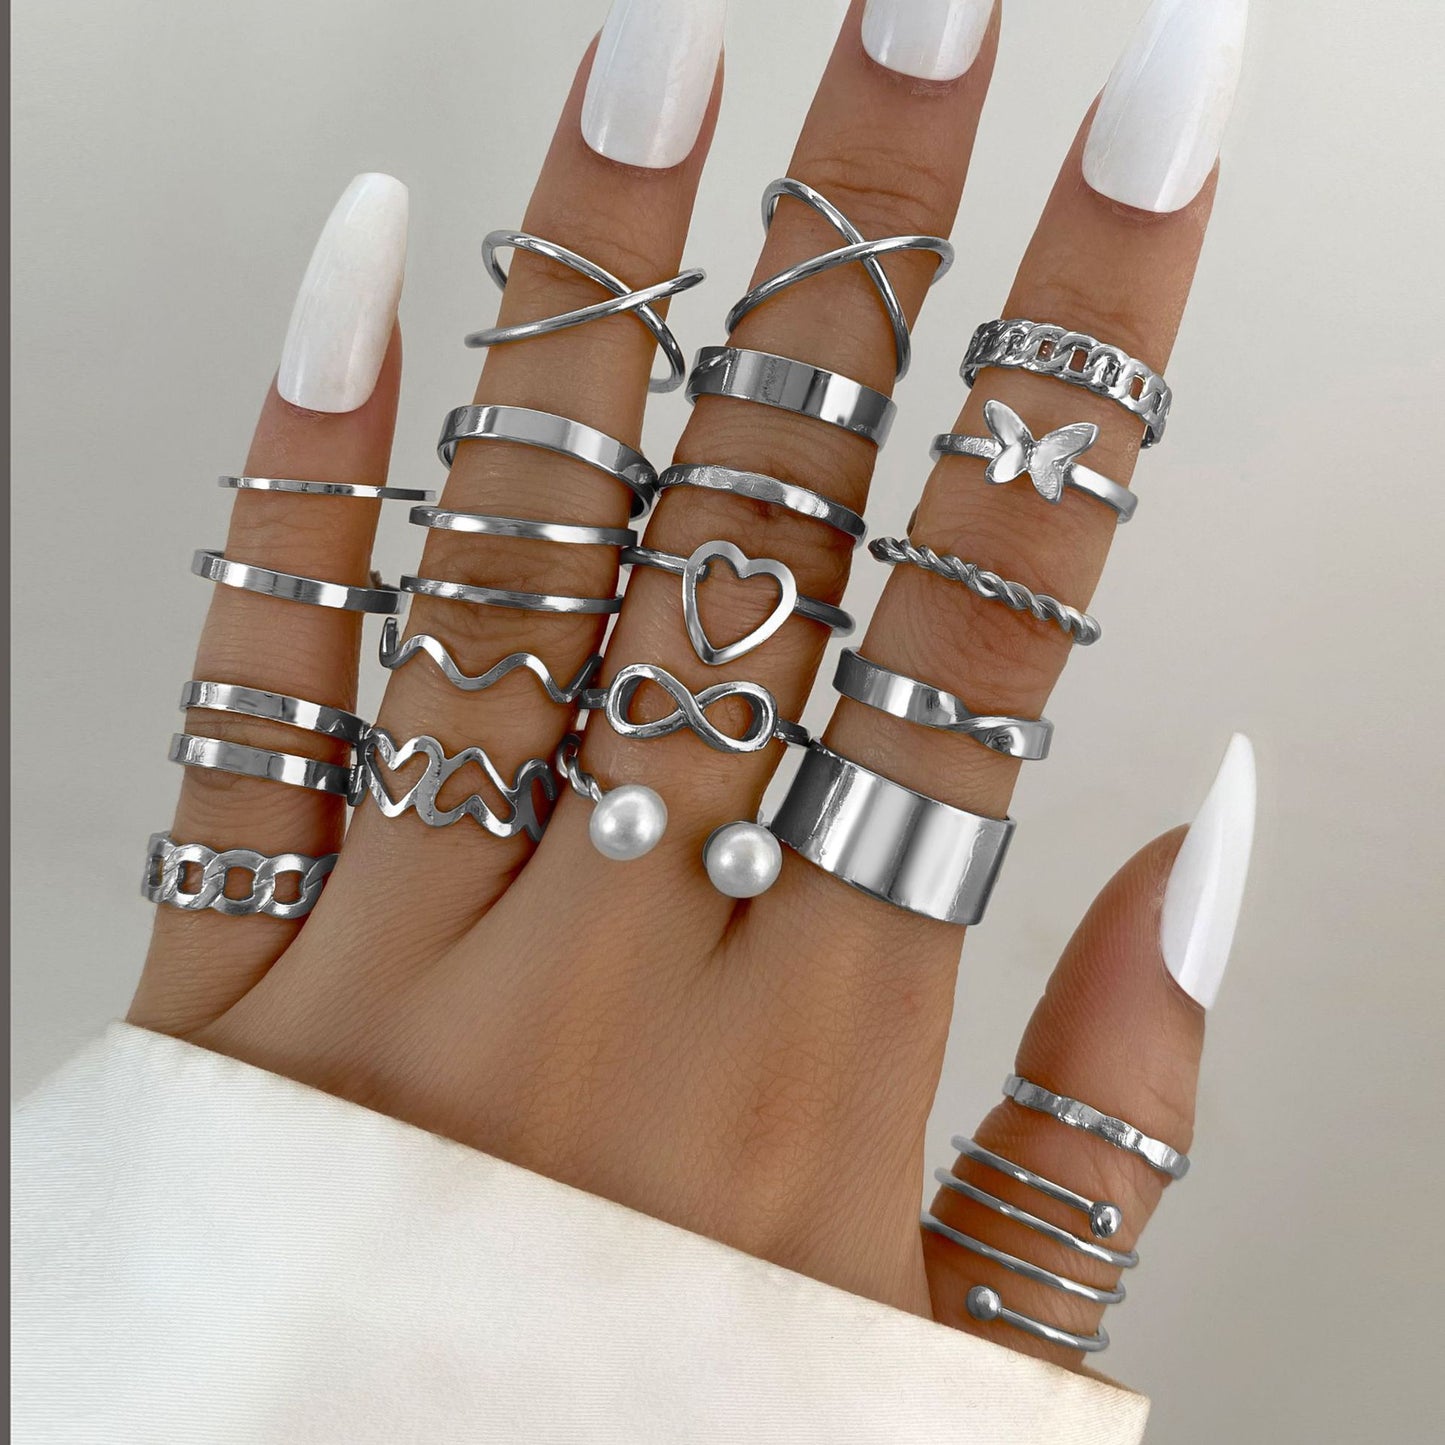 New butterfly rings set